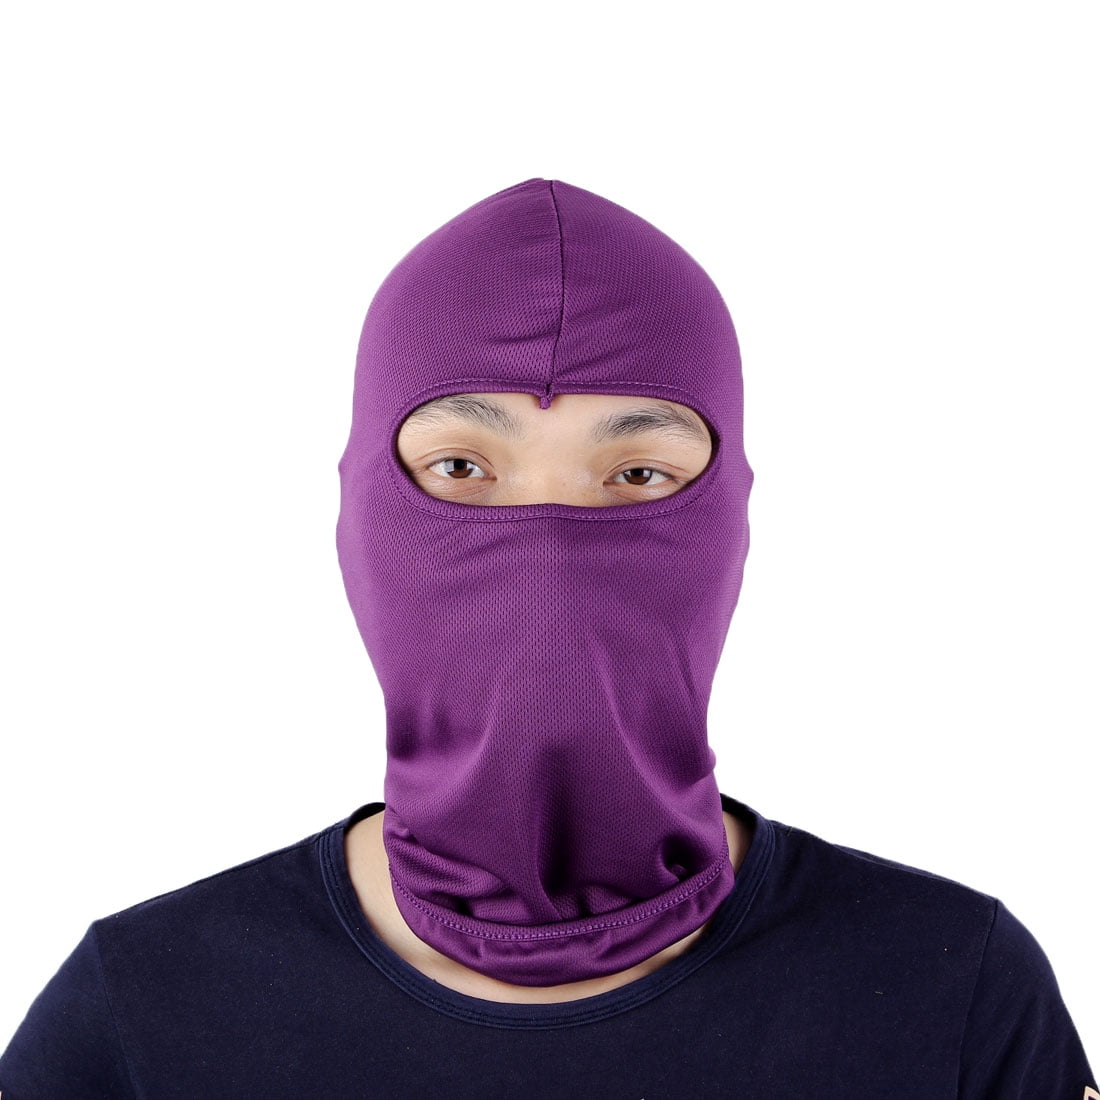 2018 Outdoor Motorcycle Bike Head Neck Cover Hood Balaclava Full Face Mask Hat 